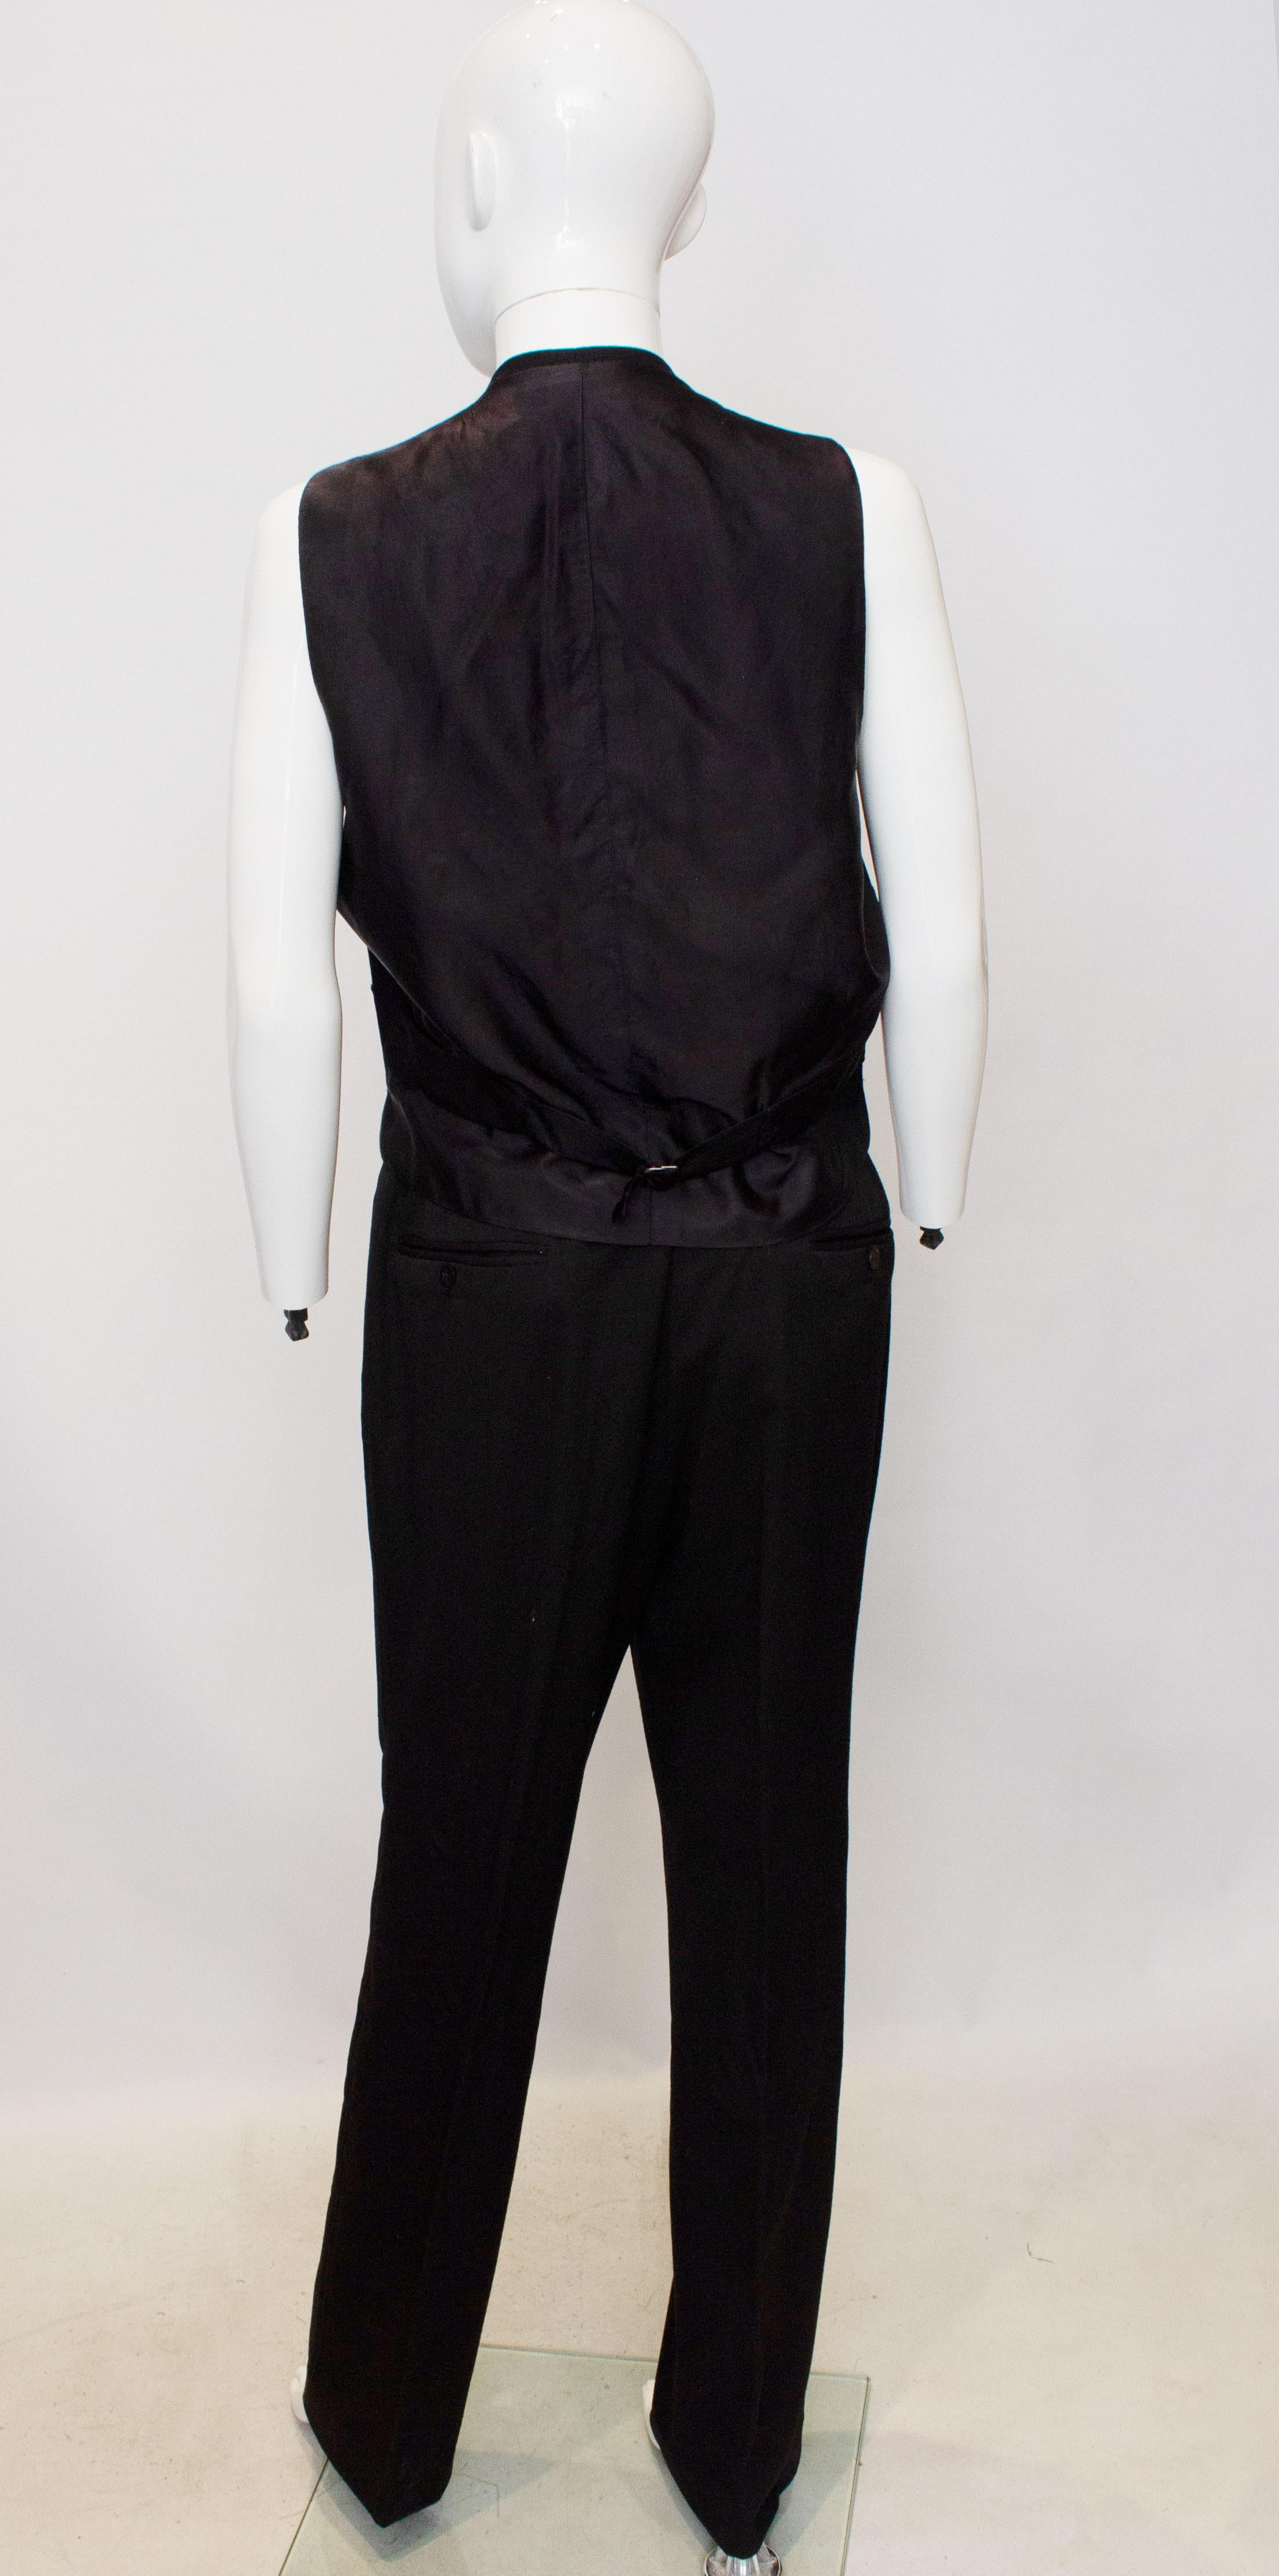 Men's Rare Vintage Trousers by A Caraceni made for Karl Lagerfeld